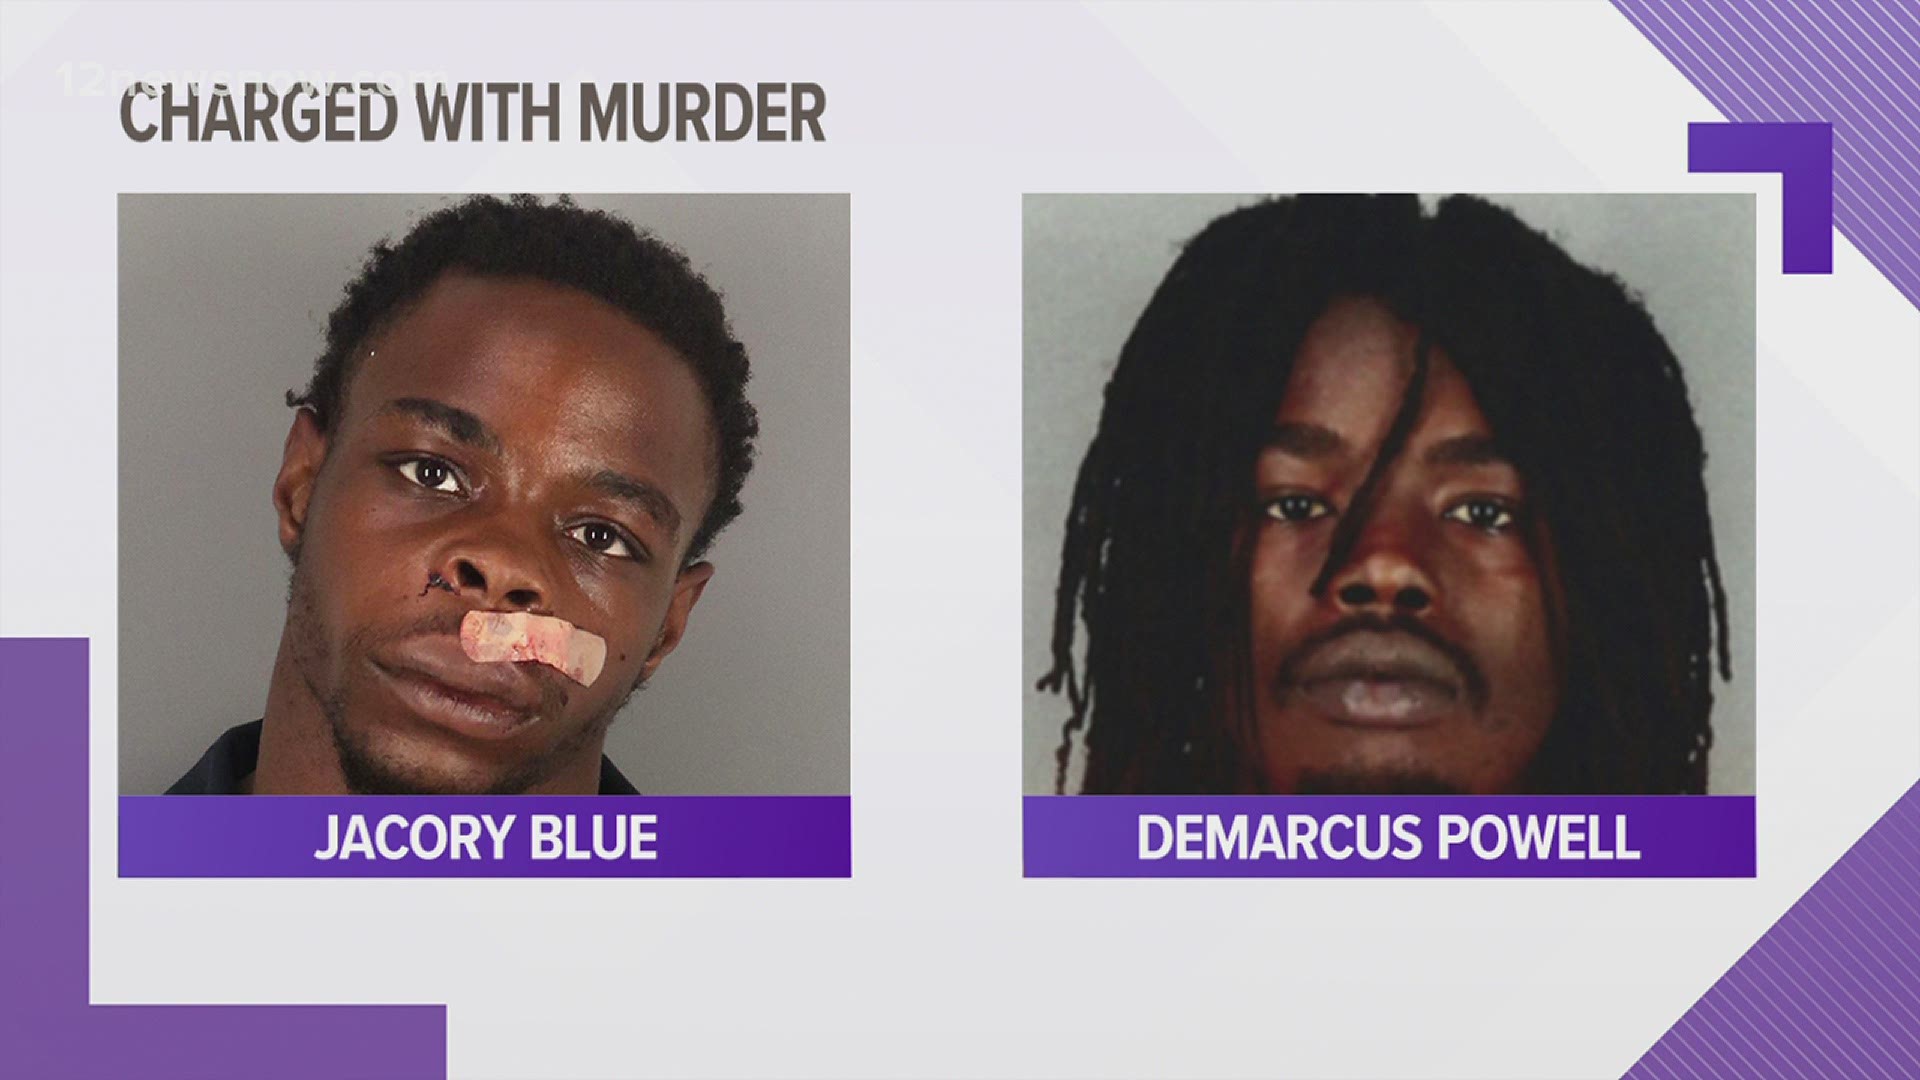 22-year-old Jacory Blue, of Beaumont, and 21-year-old Demarcus Powell, of Beaumont, were both arrested for aggravated robbery and murder charges.